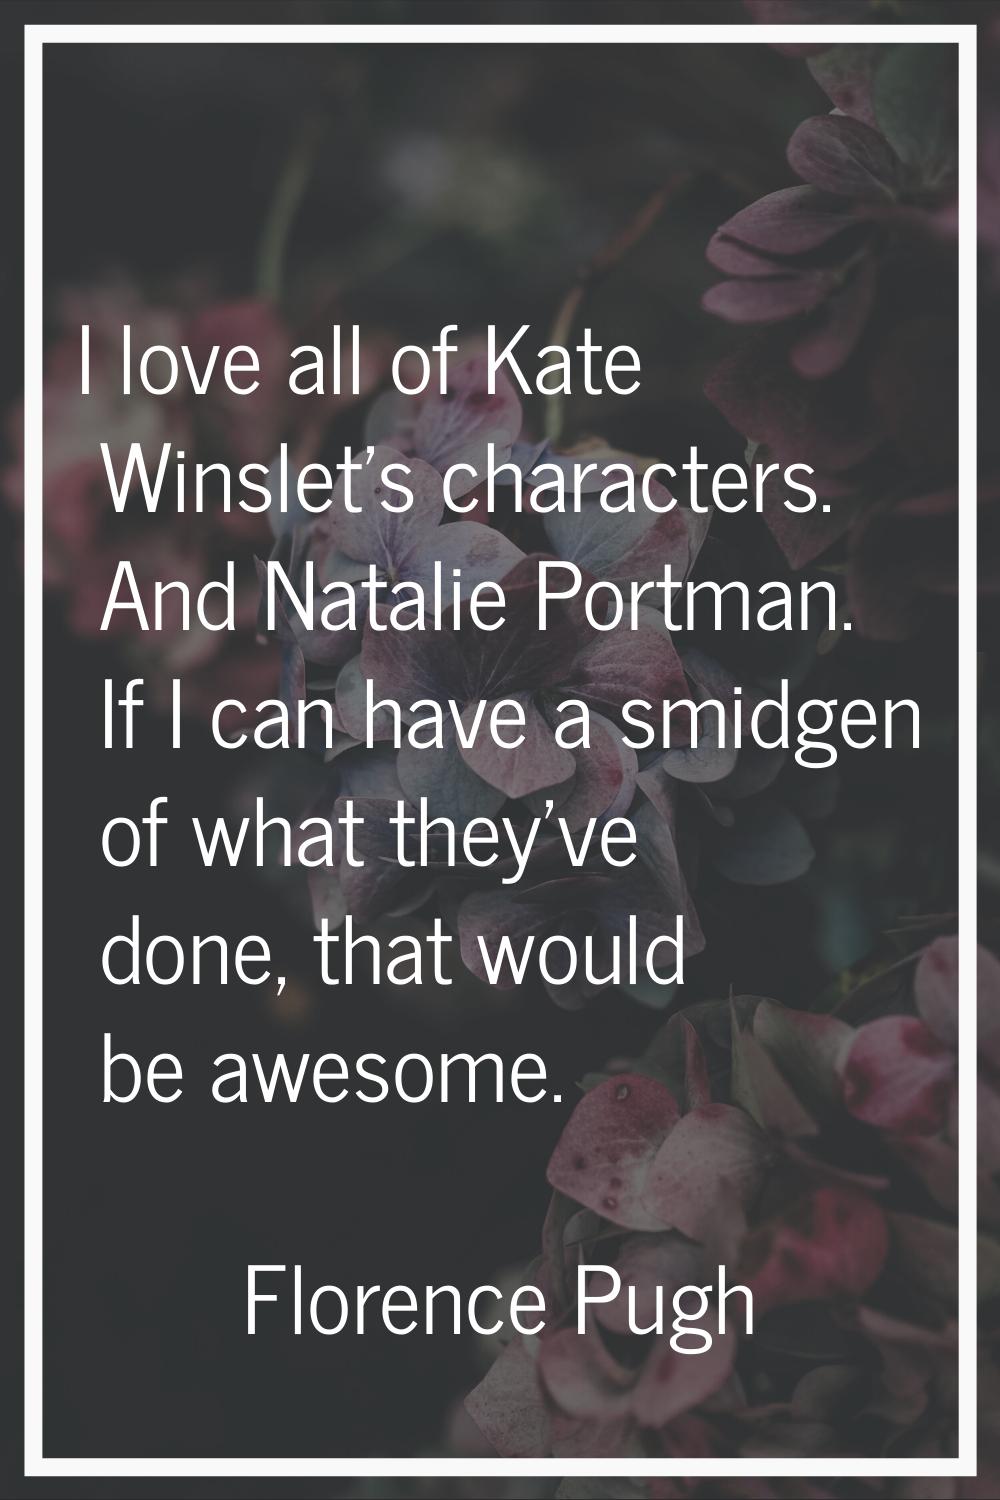 I love all of Kate Winslet's characters. And Natalie Portman. If I can have a smidgen of what they'